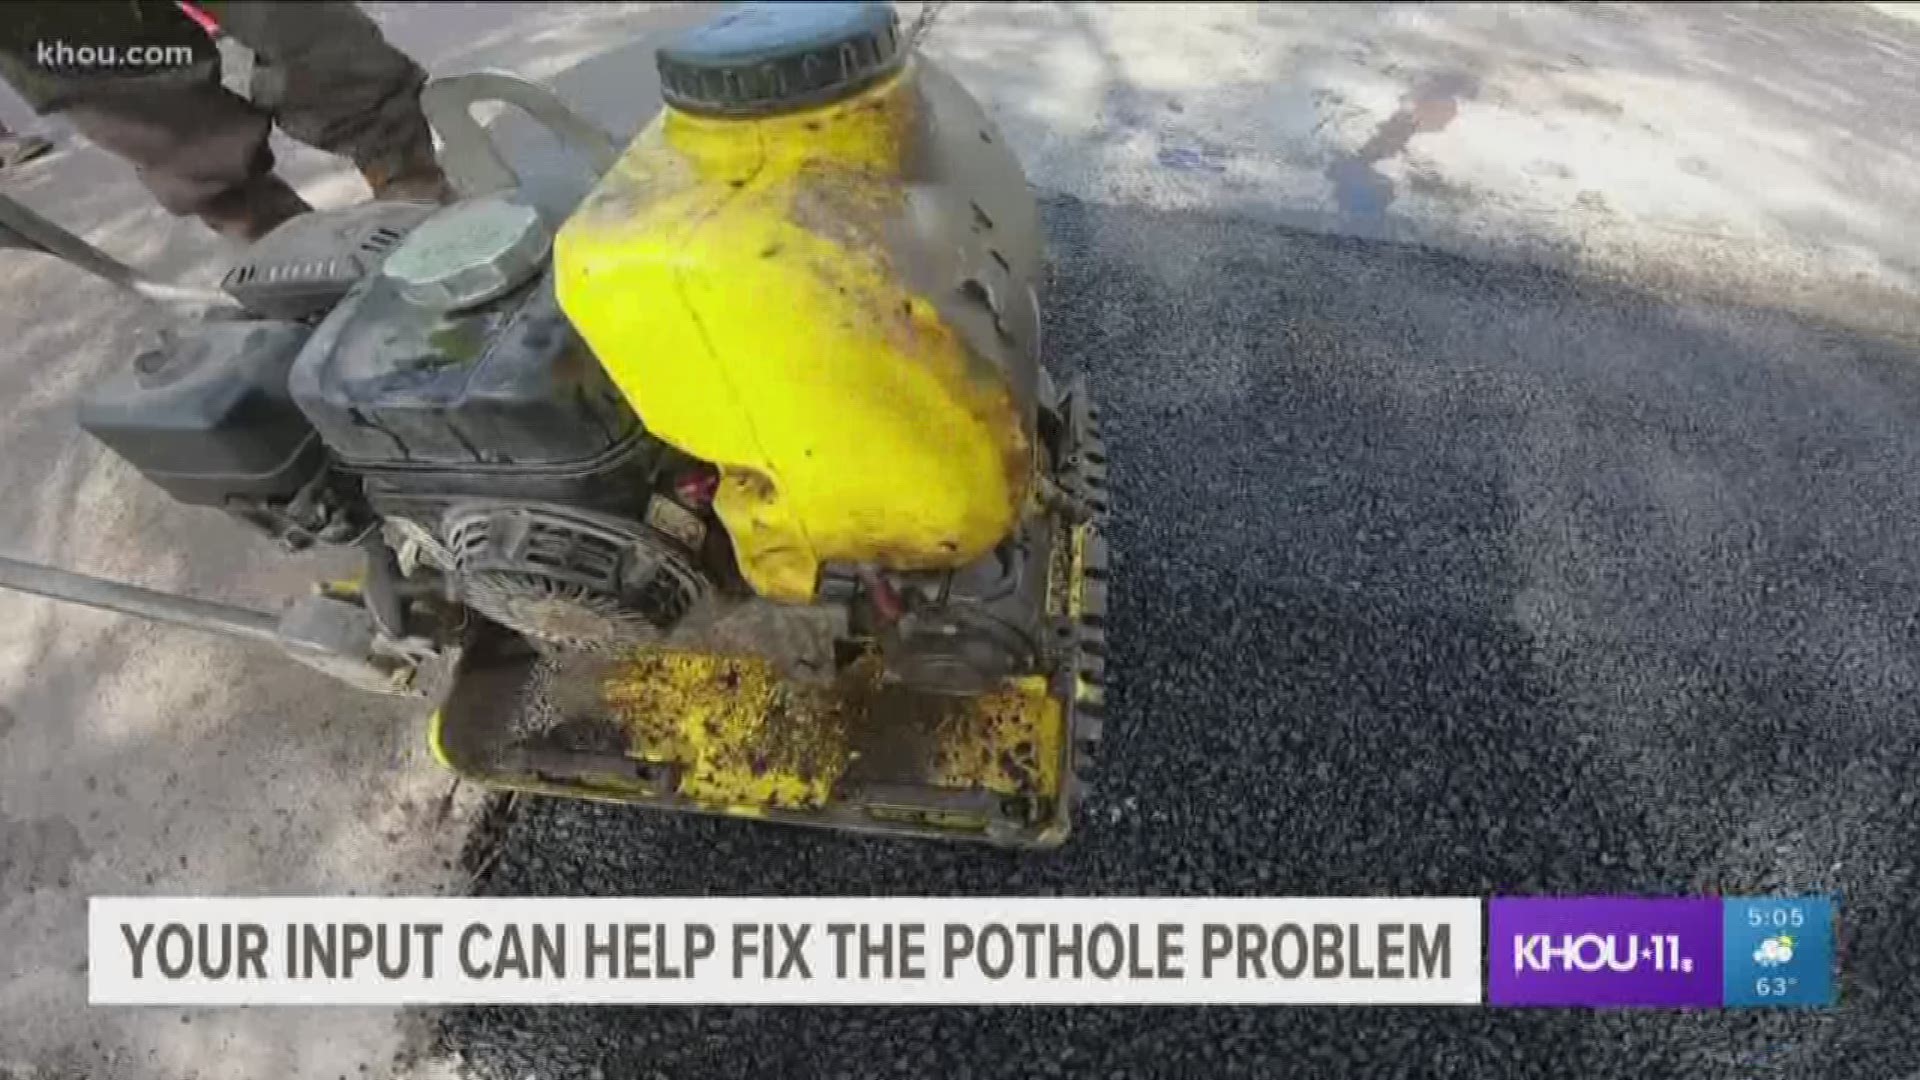 The city of Houston said they filled 34,000 potholes last year. But they would do more if more complaints came in.